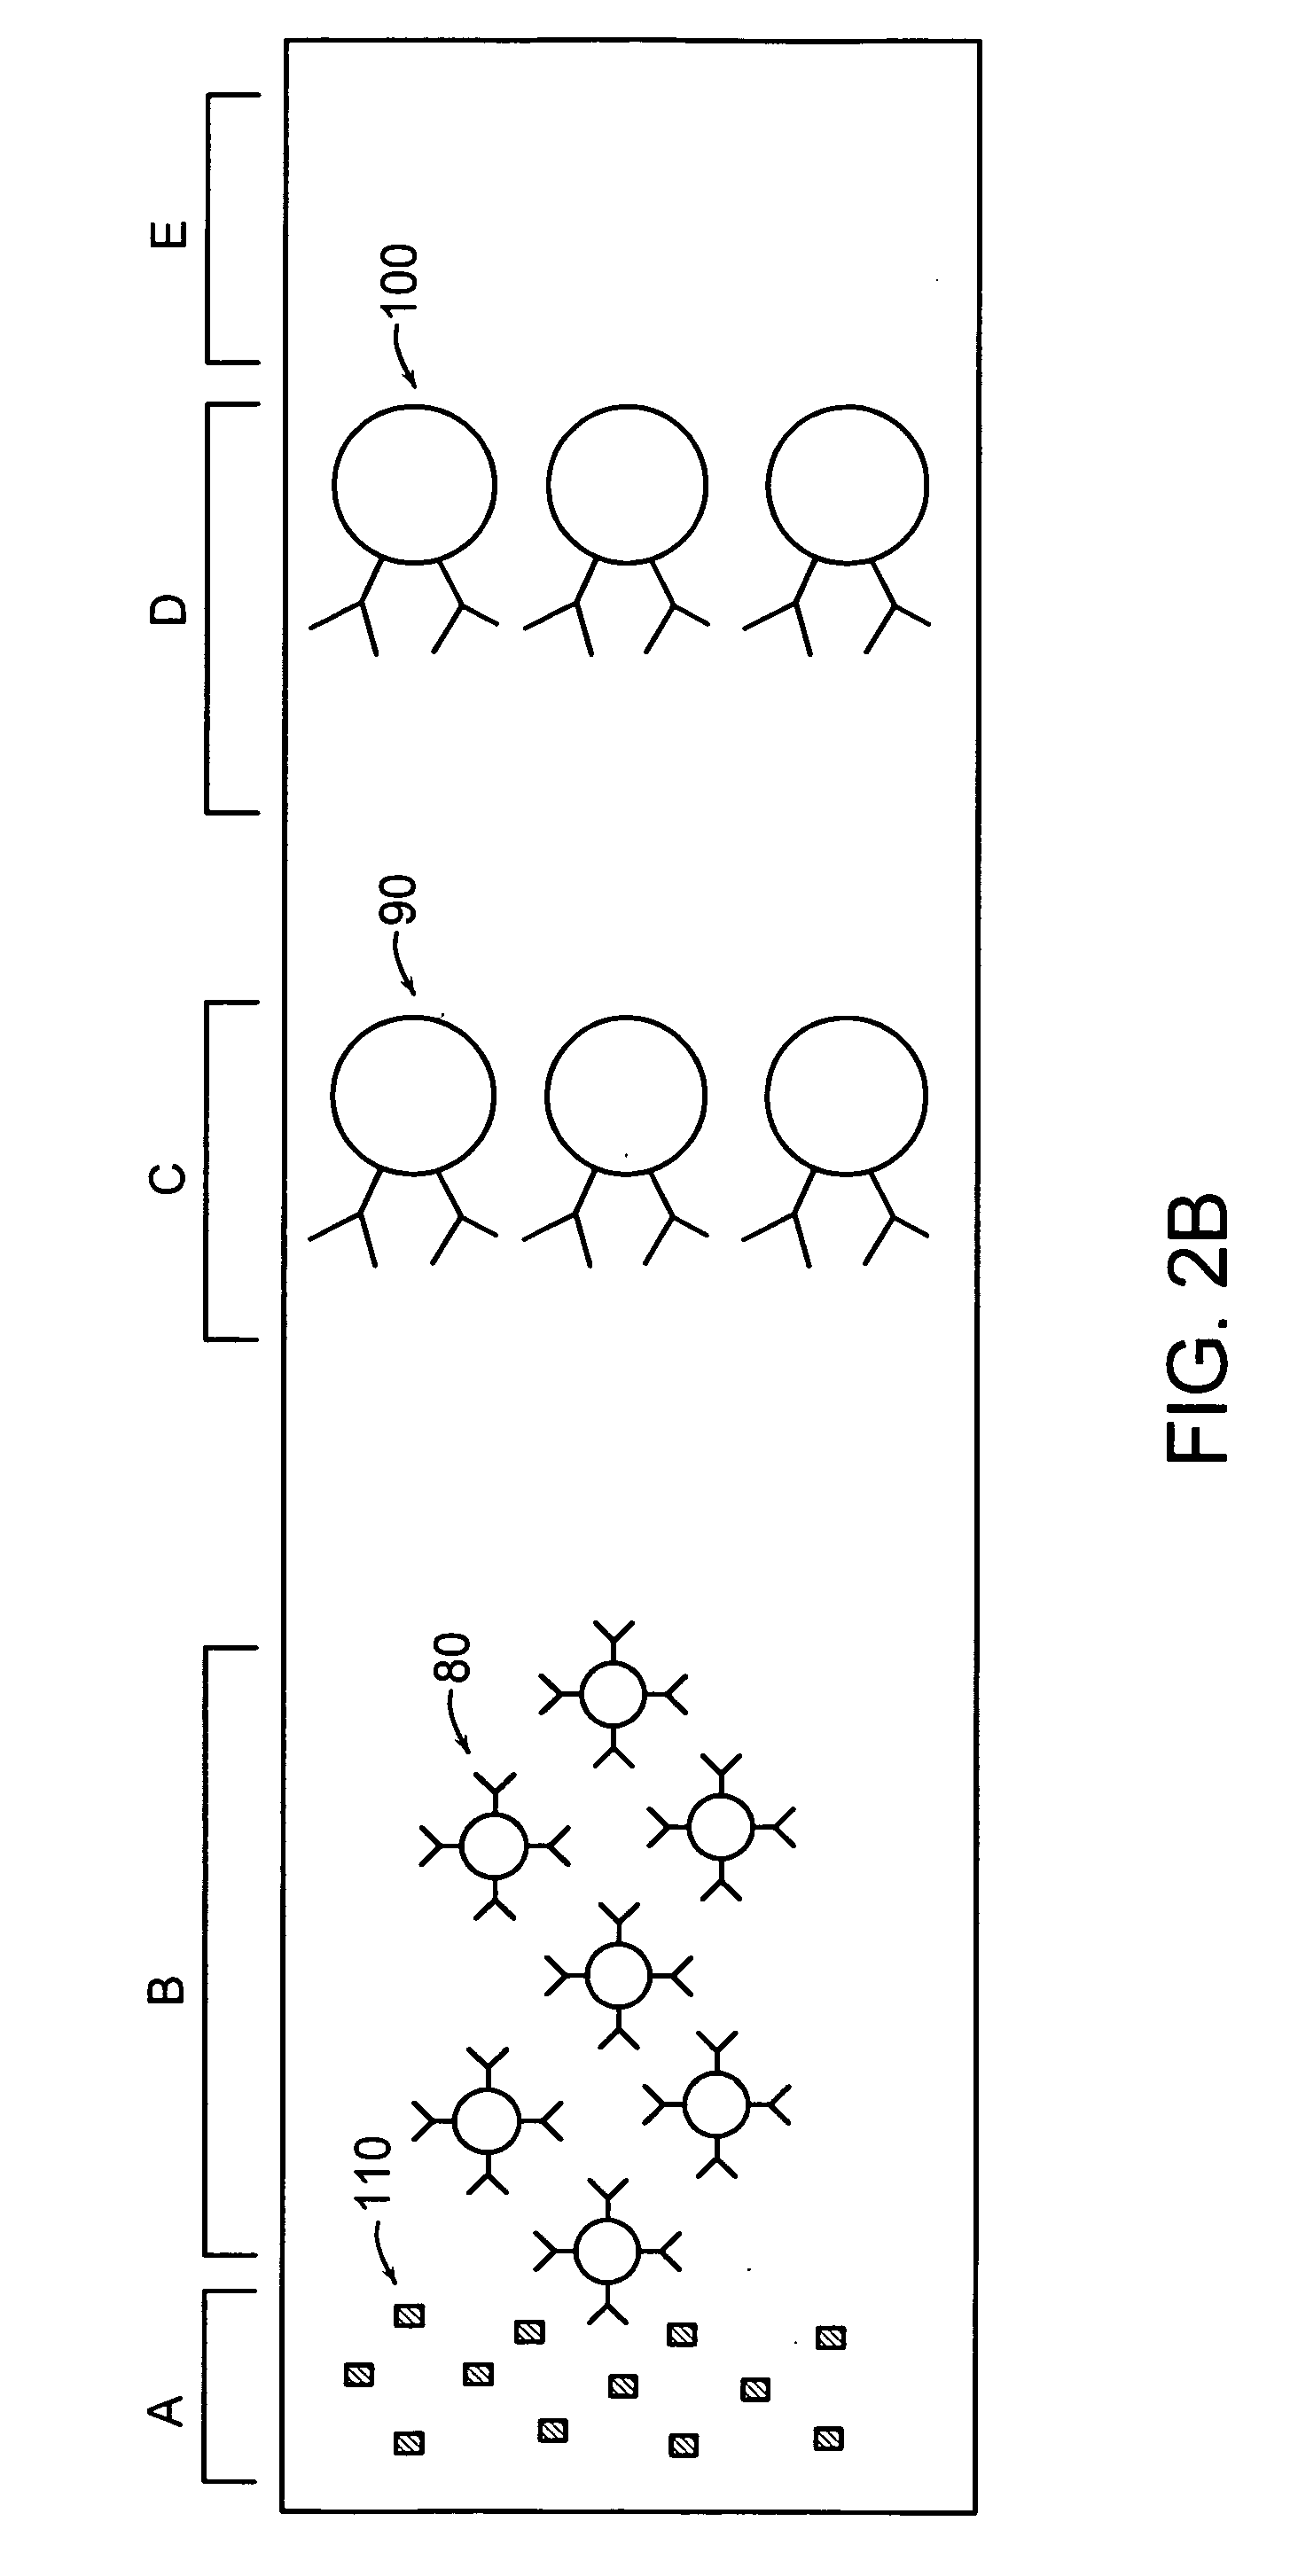 Lateral flow format, materials and methods